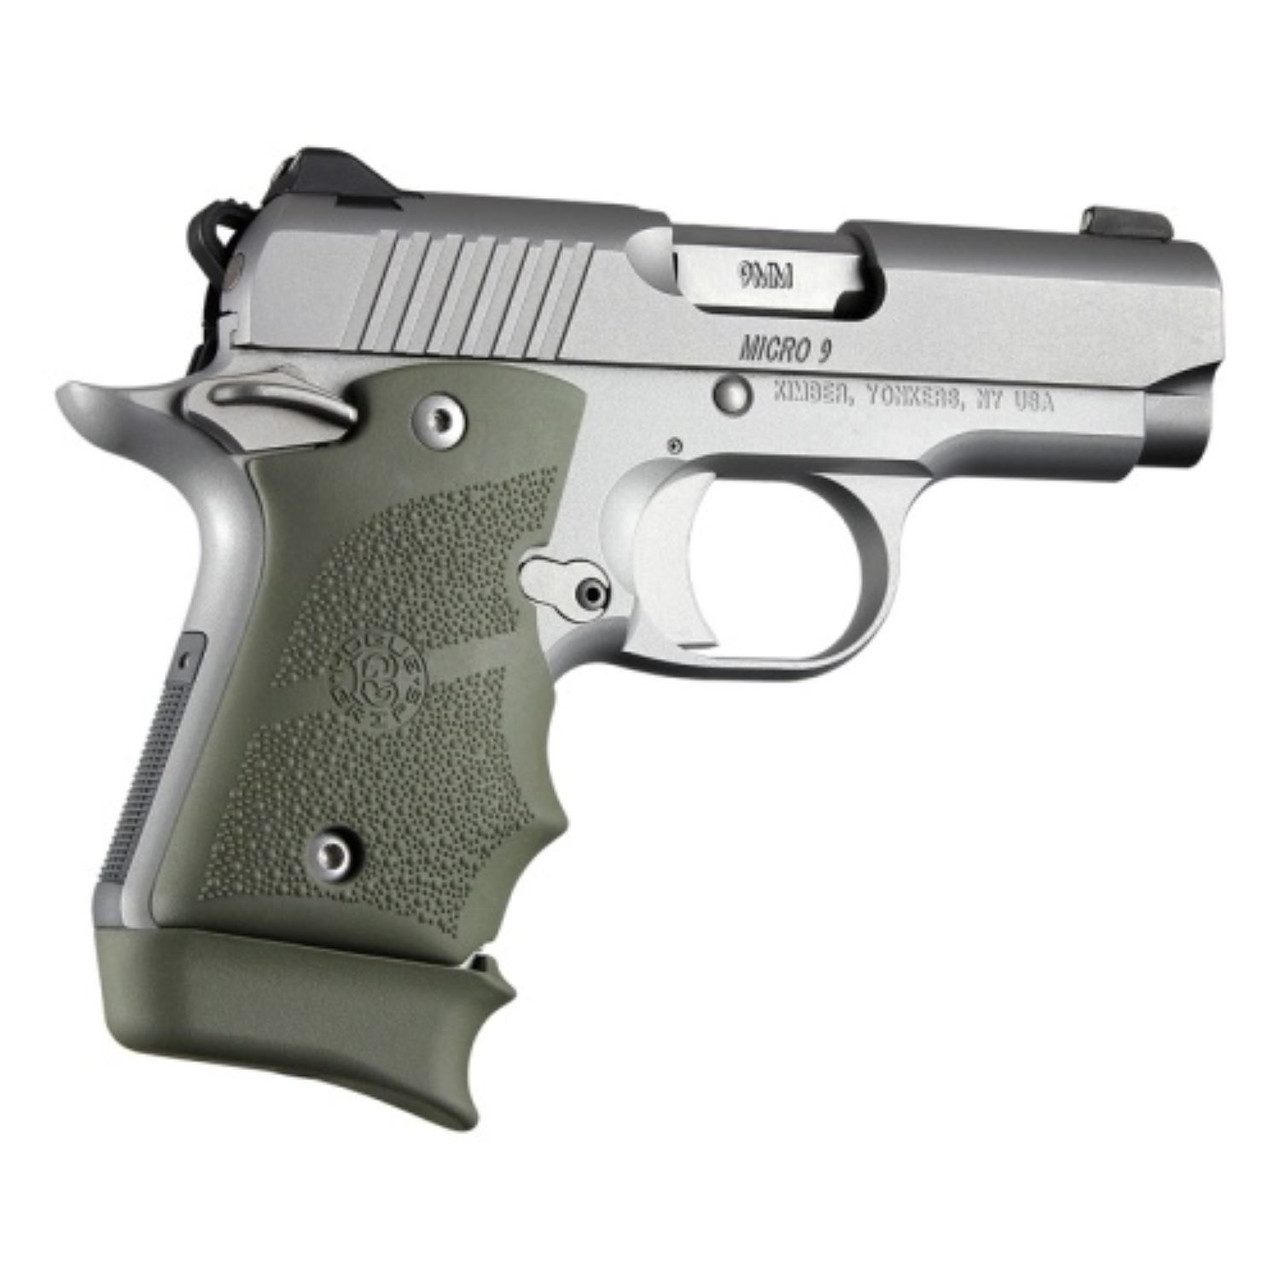 Hogue Kimber Micro 9 Rubber Grip Finger Grooves Ambi Safety - OD Green